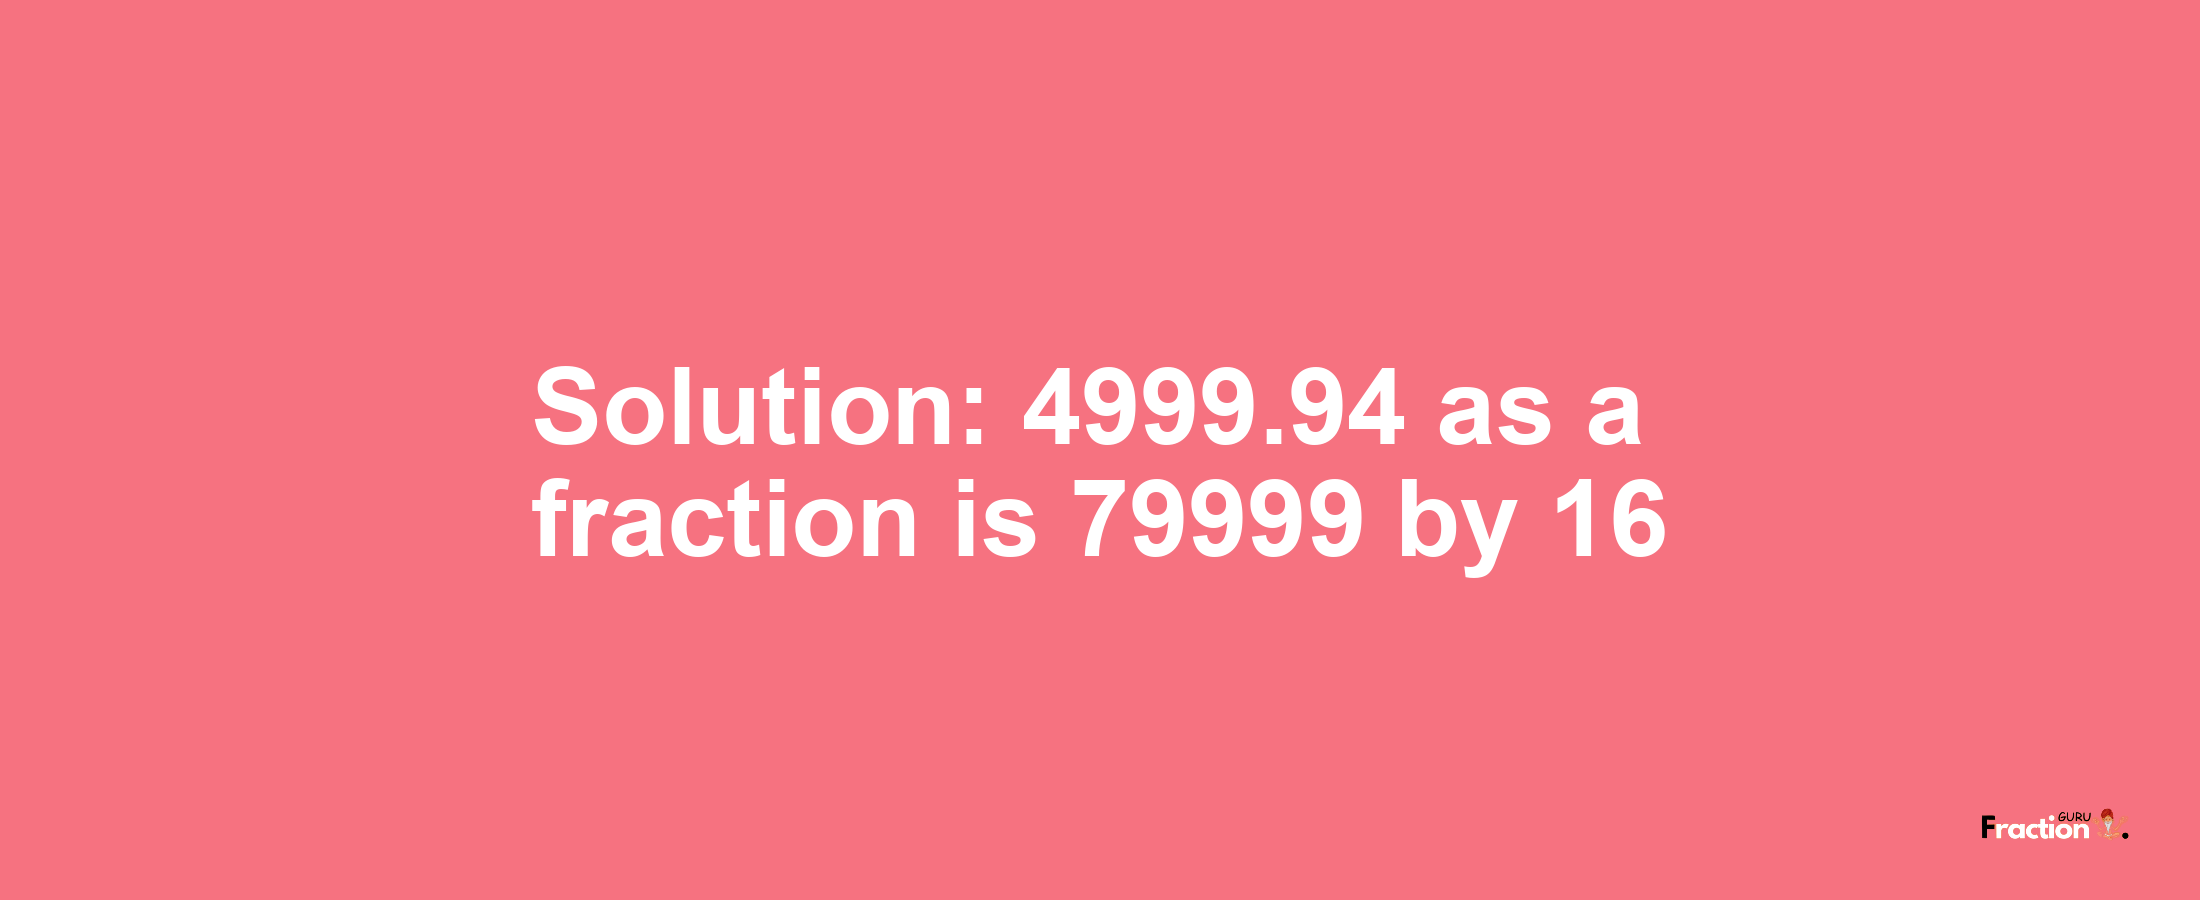 Solution:4999.94 as a fraction is 79999/16